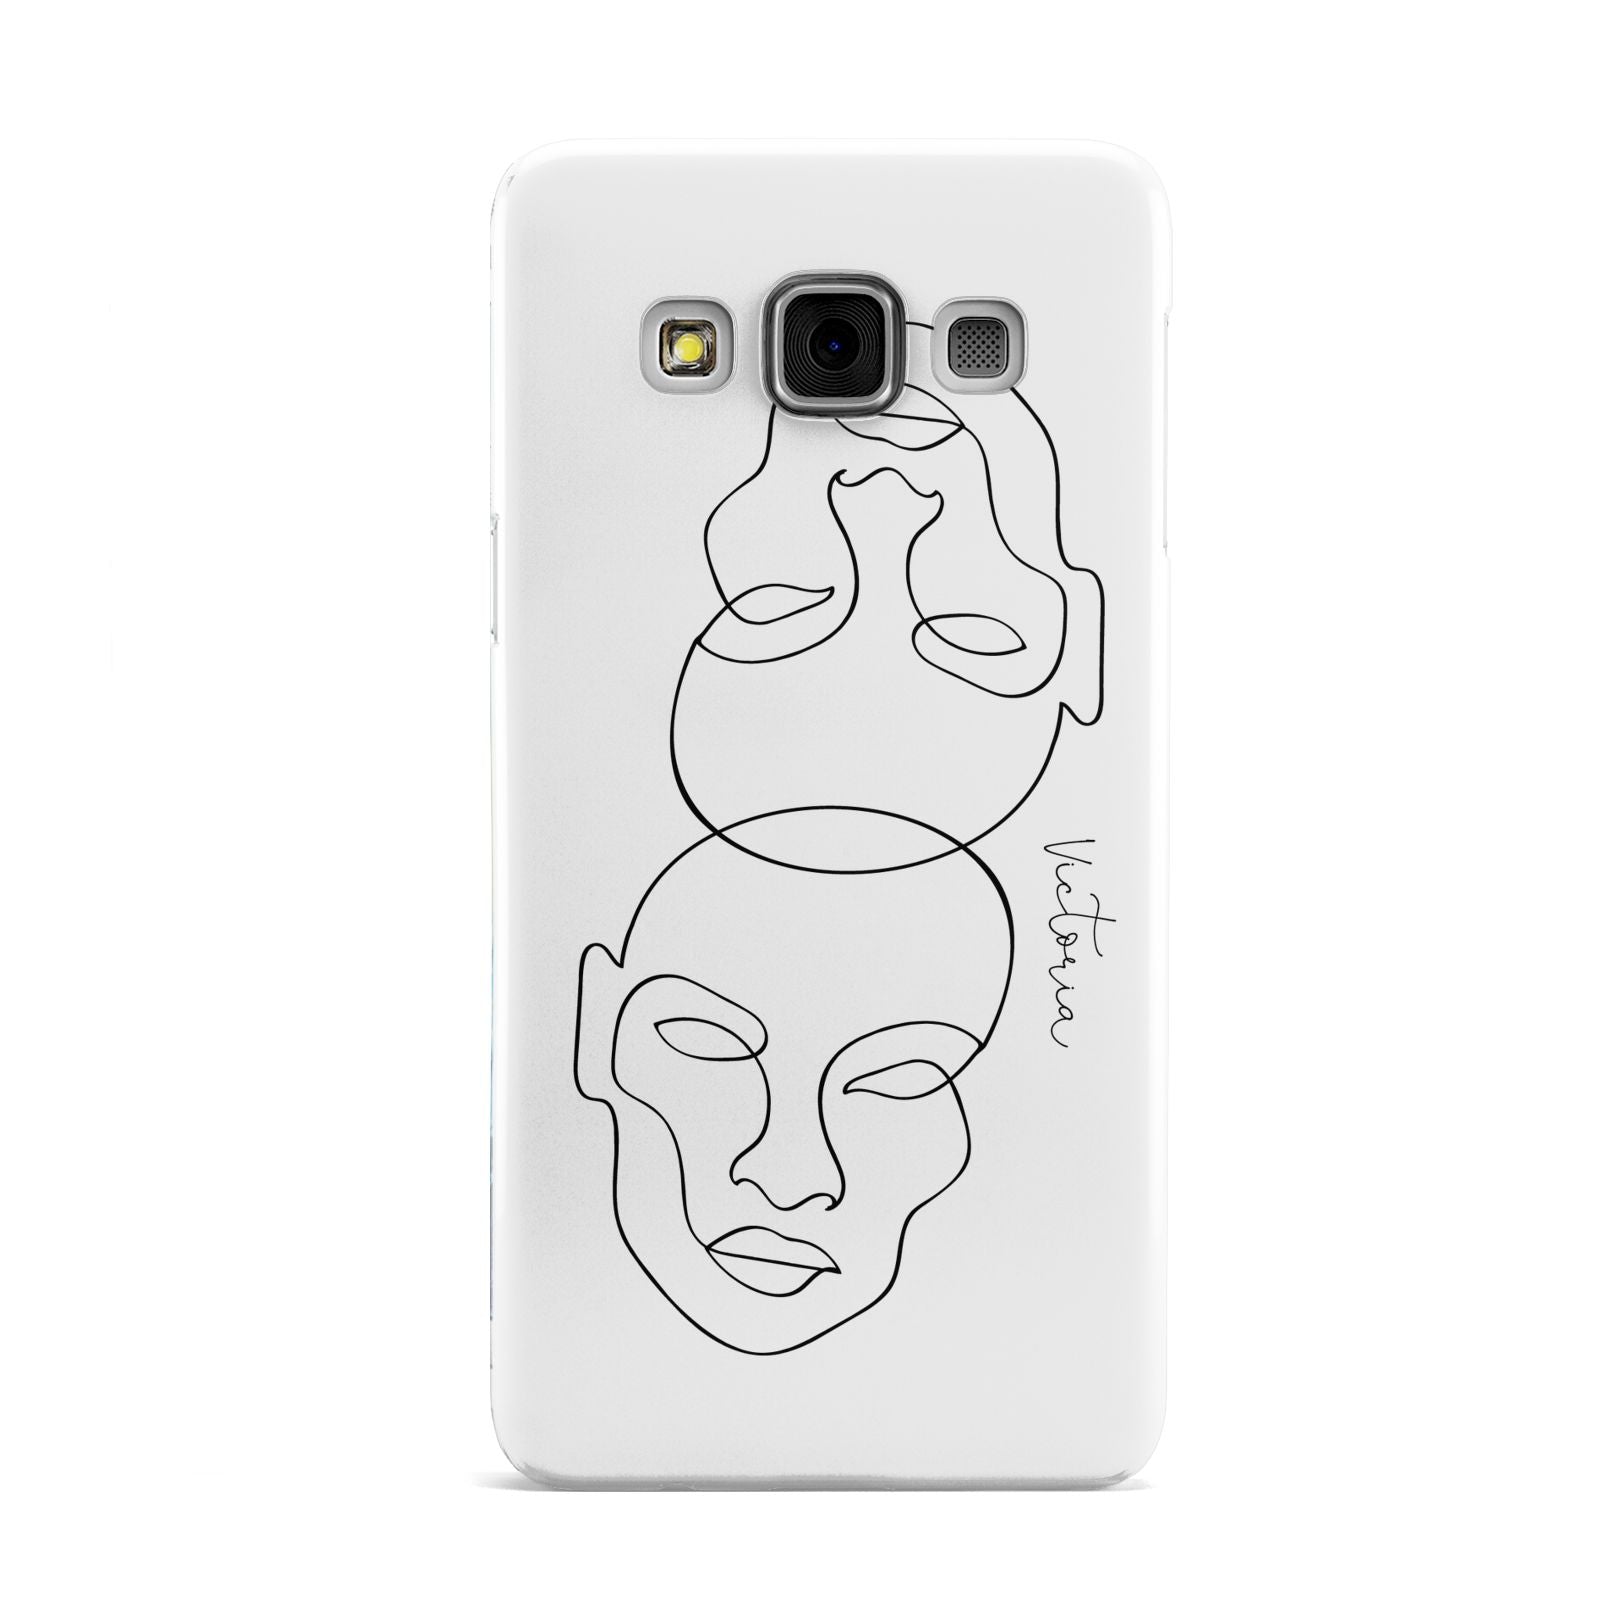 Personalised White Line Art Samsung Galaxy A3 Case